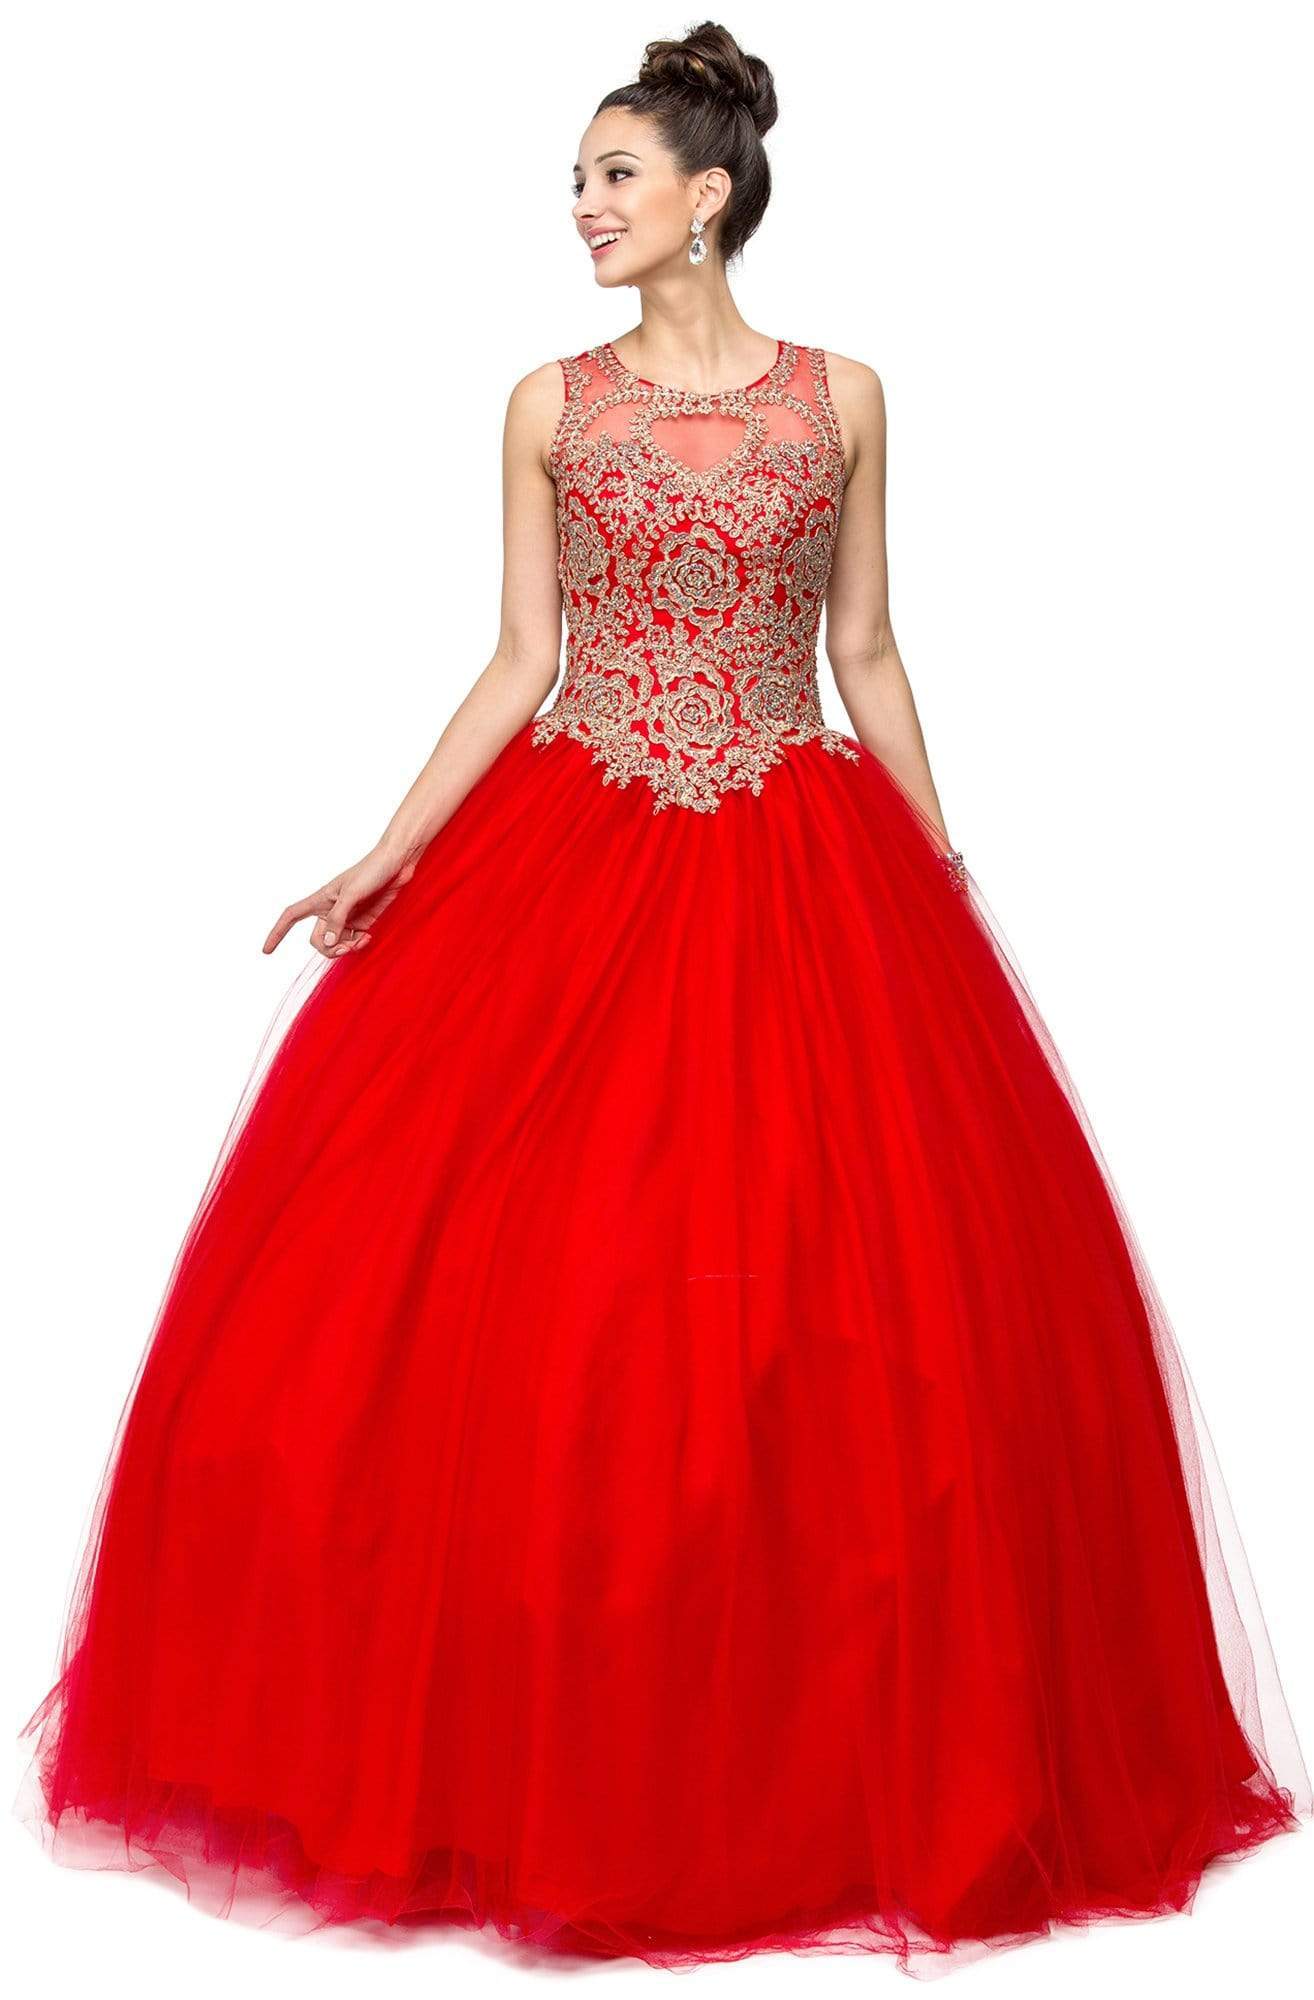 Dancing Queen - 1101 Gold Embroidered Illusion Neck Formal Ball Gown Quinceanera Dresses XS / Red